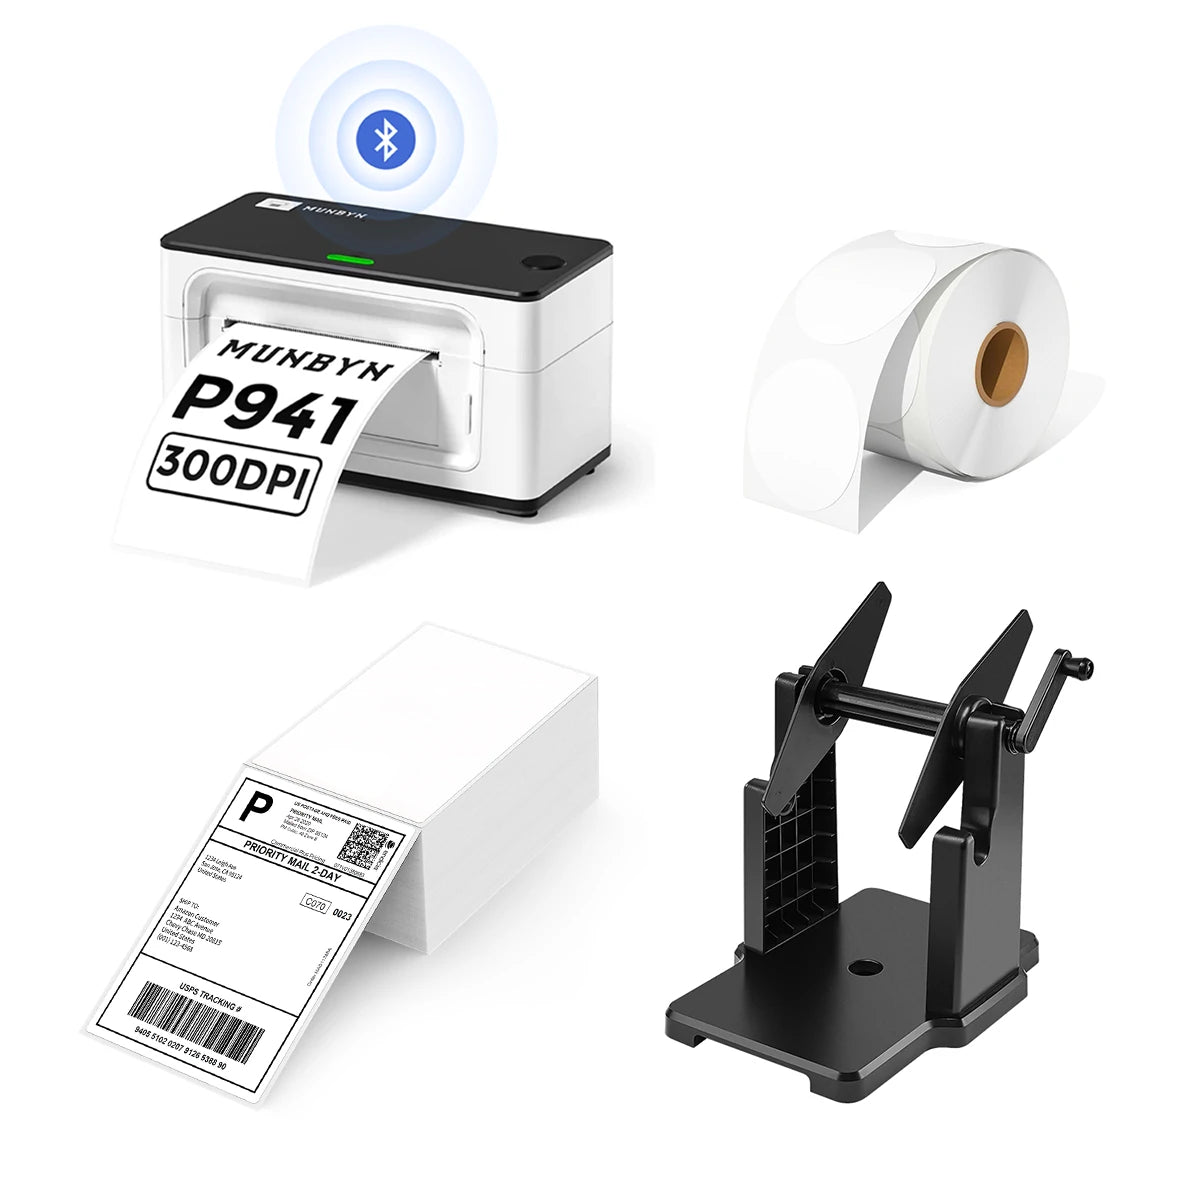 The MUNBYN 941B white Bluetooth label printer kit comes with a printer, a label holder, a roll of blank circle labels, and a stack of shipping labels